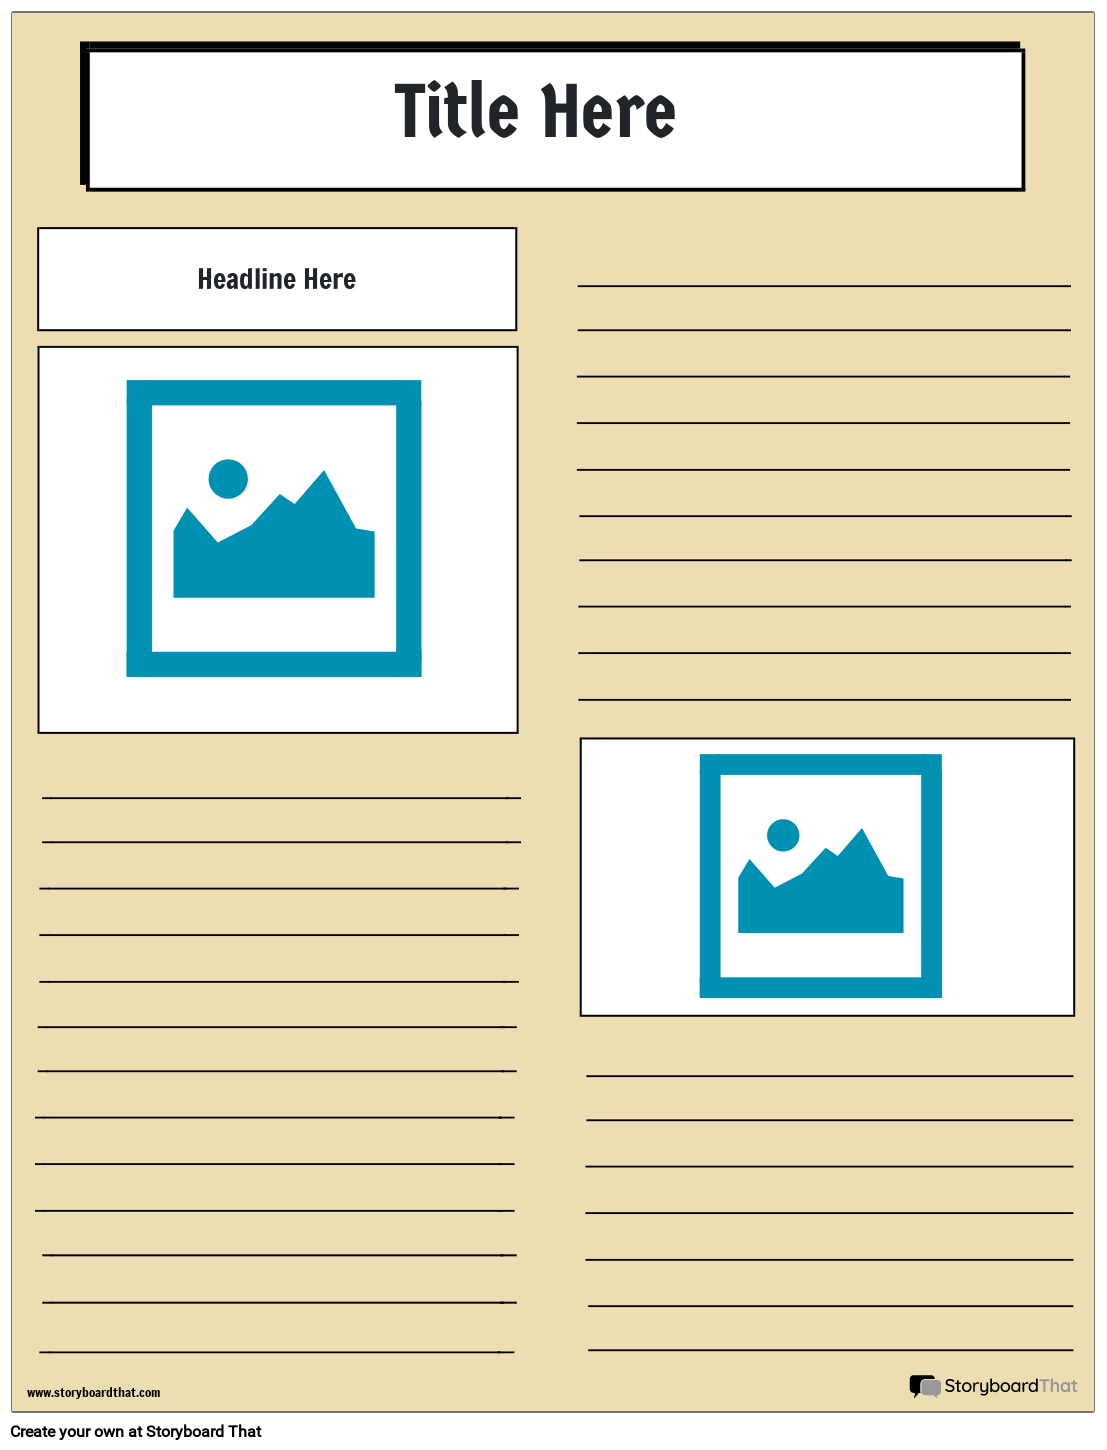 Create A Newspaper Project Newspaper Project Templates